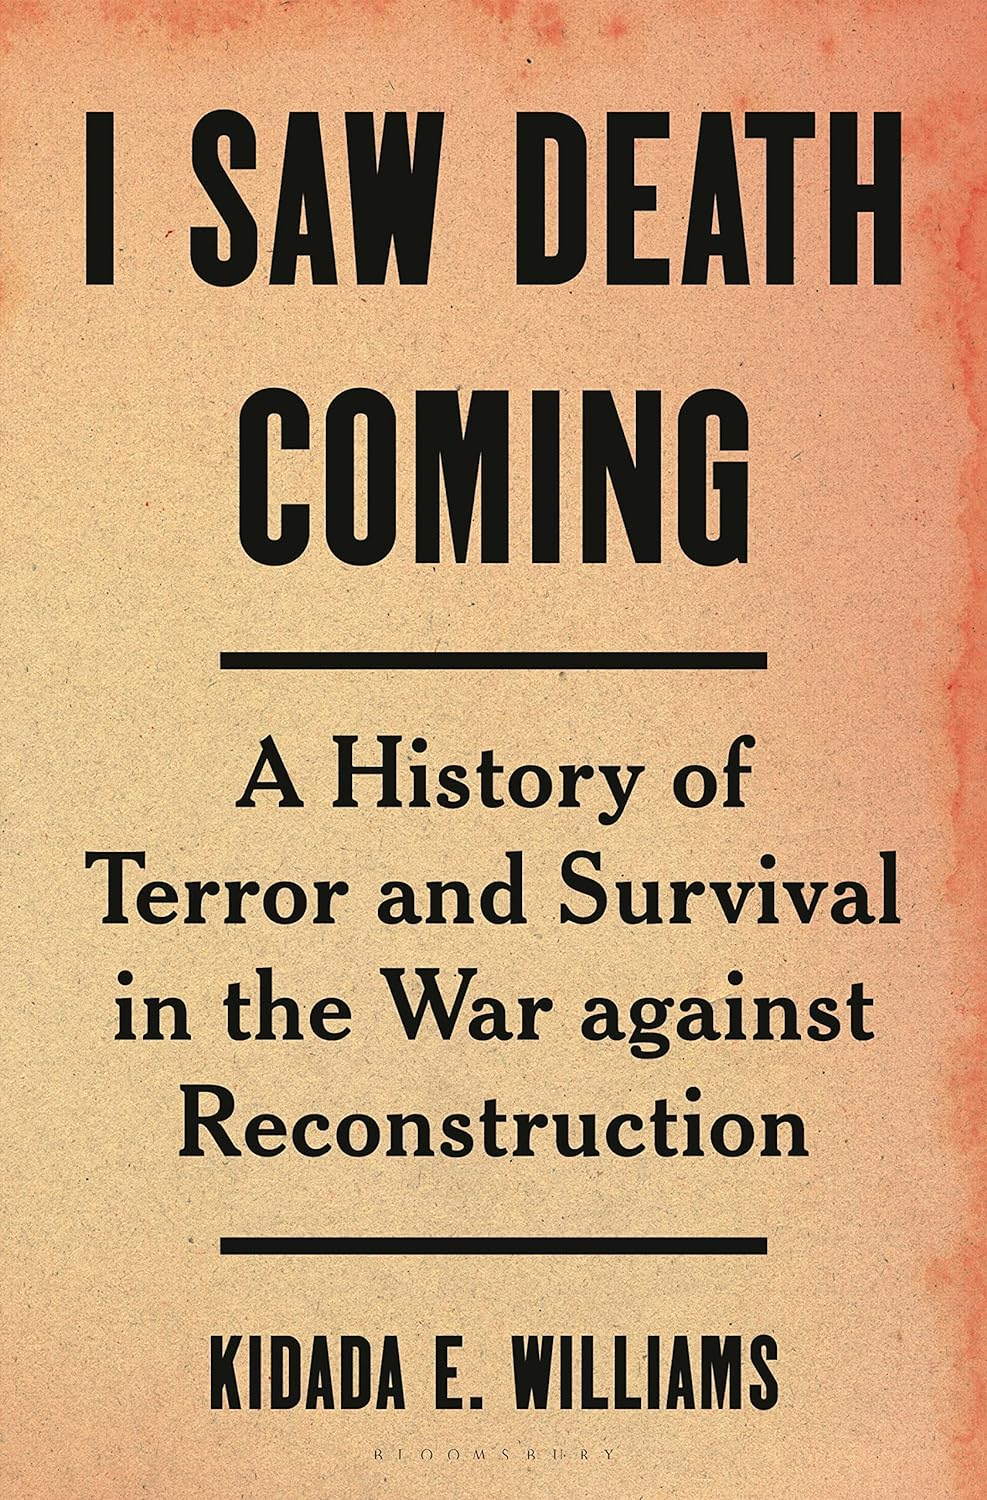 I Saw Death Coming // A History of Terror and Survival in the War Against Reconstruction